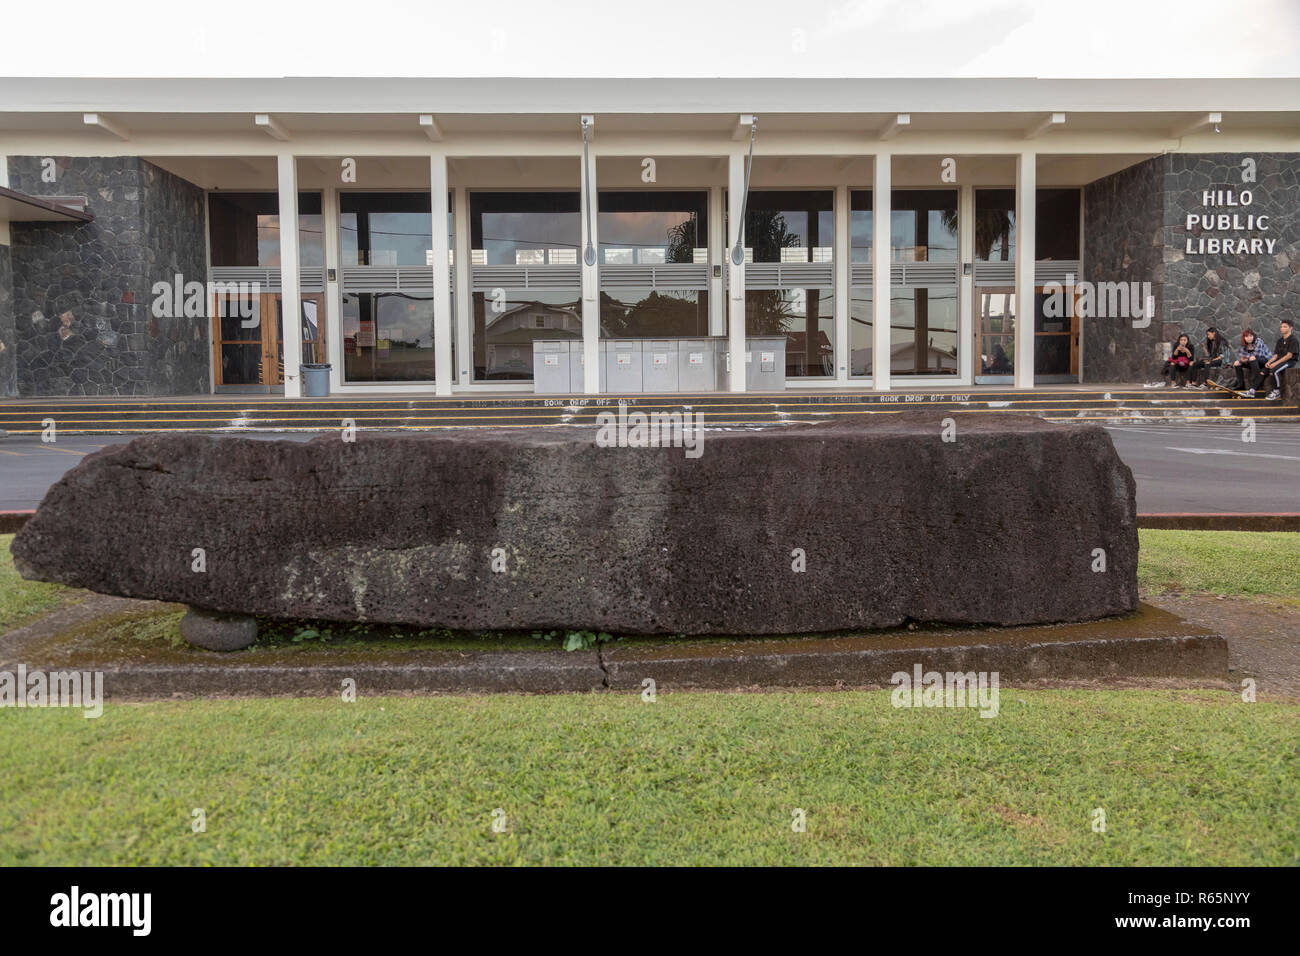 Hilo, Hawaii - The Naha Stone, in front of the Hilo Public Library. Legend says that when he was a youth, King Kamehameha was able to move this 7,000  Stock Photo